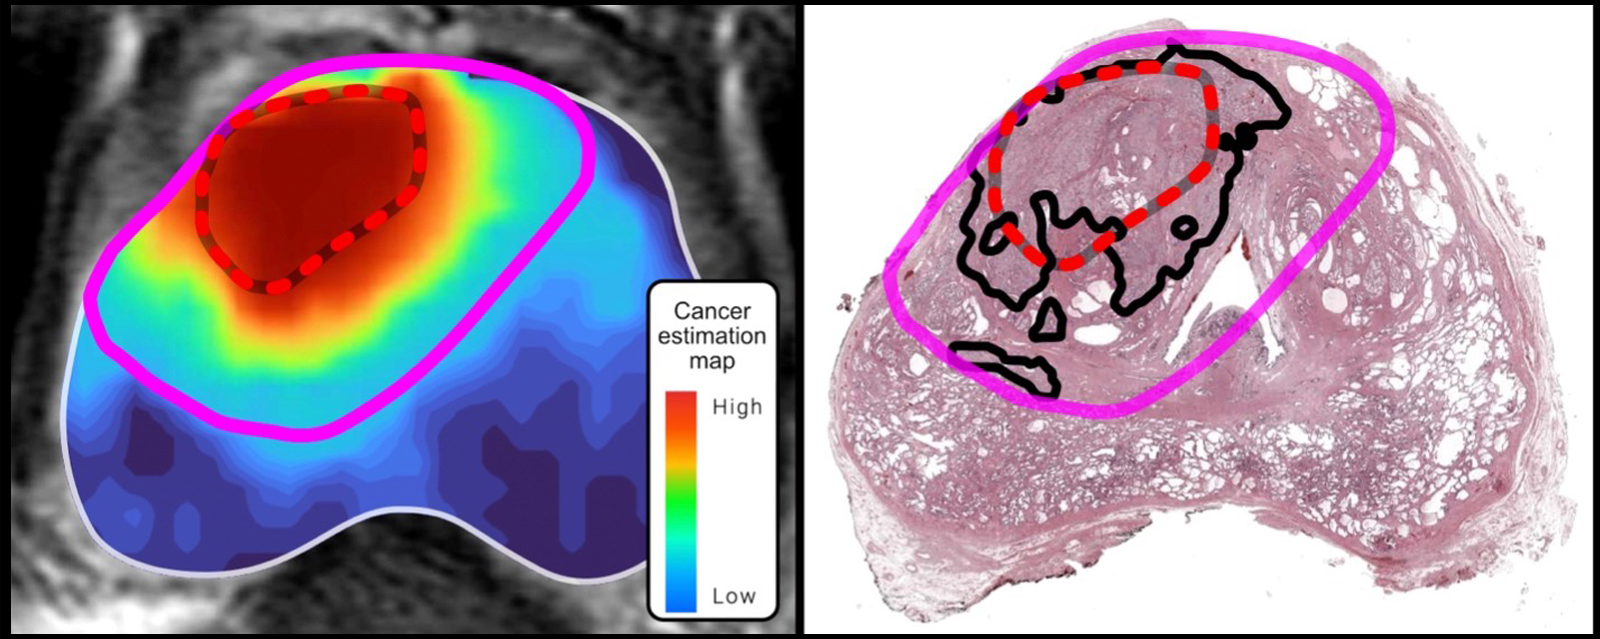 AI-model maps tumor margins, designated by a large oblong circle (shown in pink) that extends well beyond the much smaller margins identified using a conventional MRI approach (shown in red). The region outside the pink circle is blue. Scale on right, which reads “Cancer Estimation Map High Low,” shows the likelihood of cancer, with red being the highest risk and blue being the lowest risk. An image on the right shows histopathological finding. It shows the full extent of the tumor enclosed by black lines. 